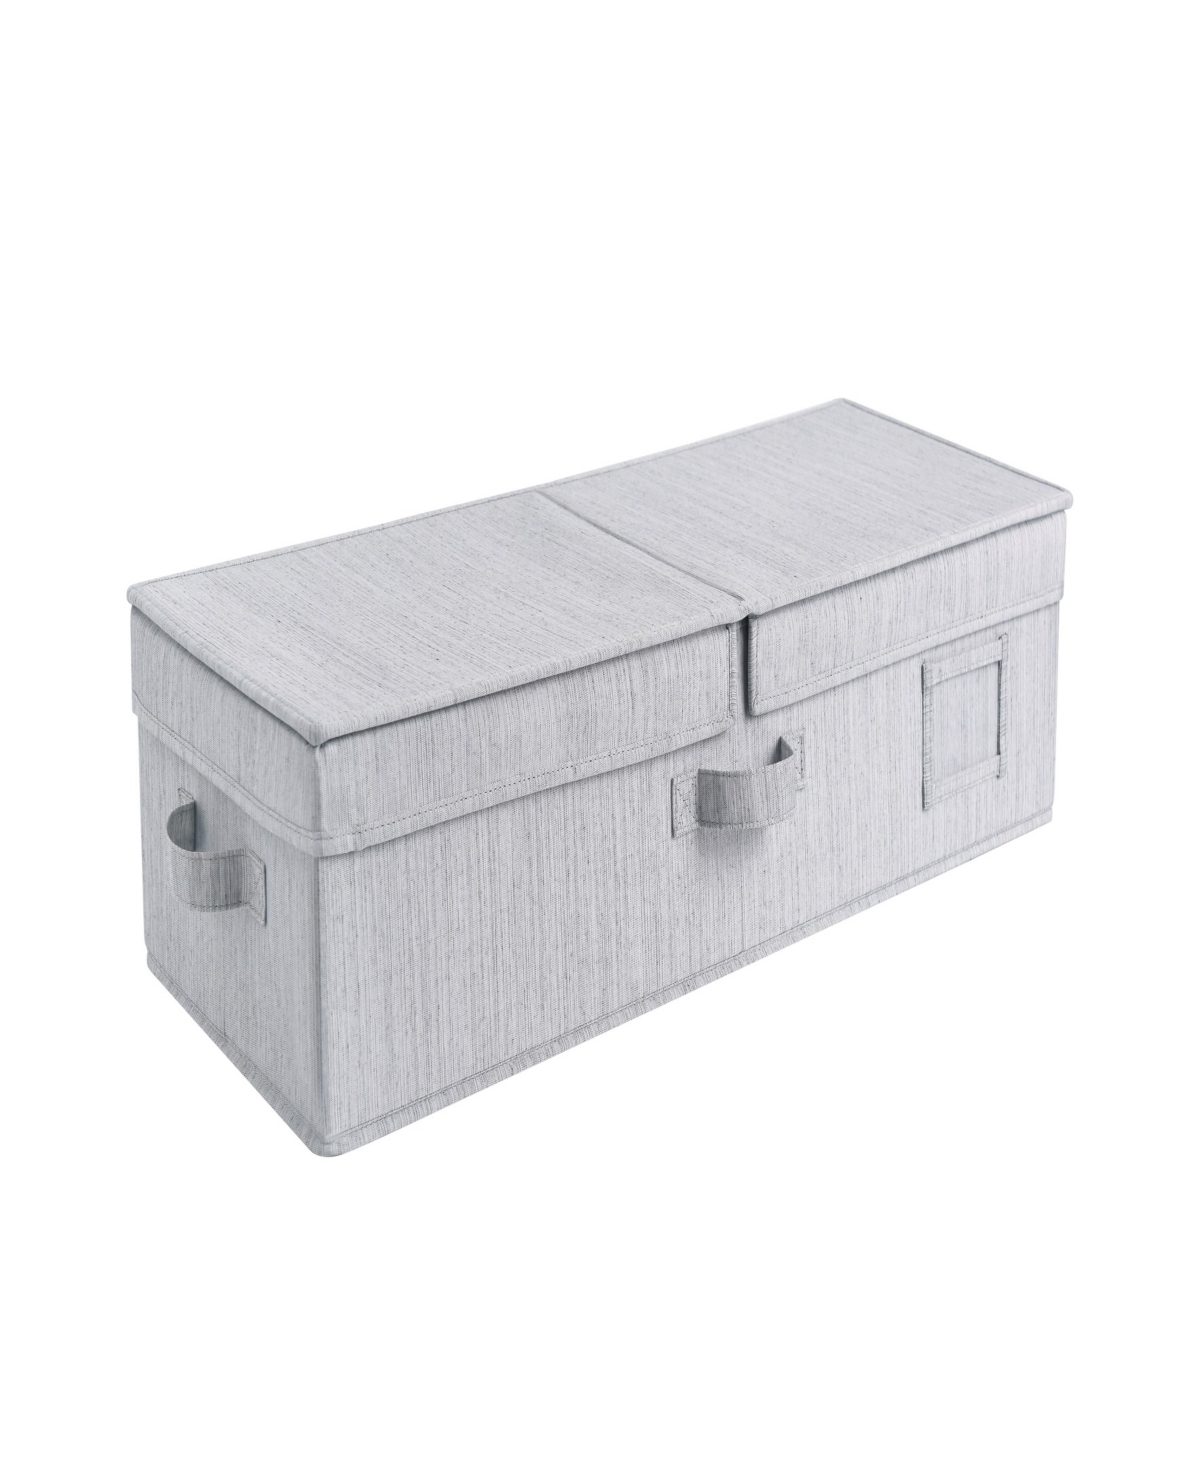 Wethinkstorage 38.8 Litre Collapsible Under Bed Fabric Storage Bin With Double-open Lid In Gray